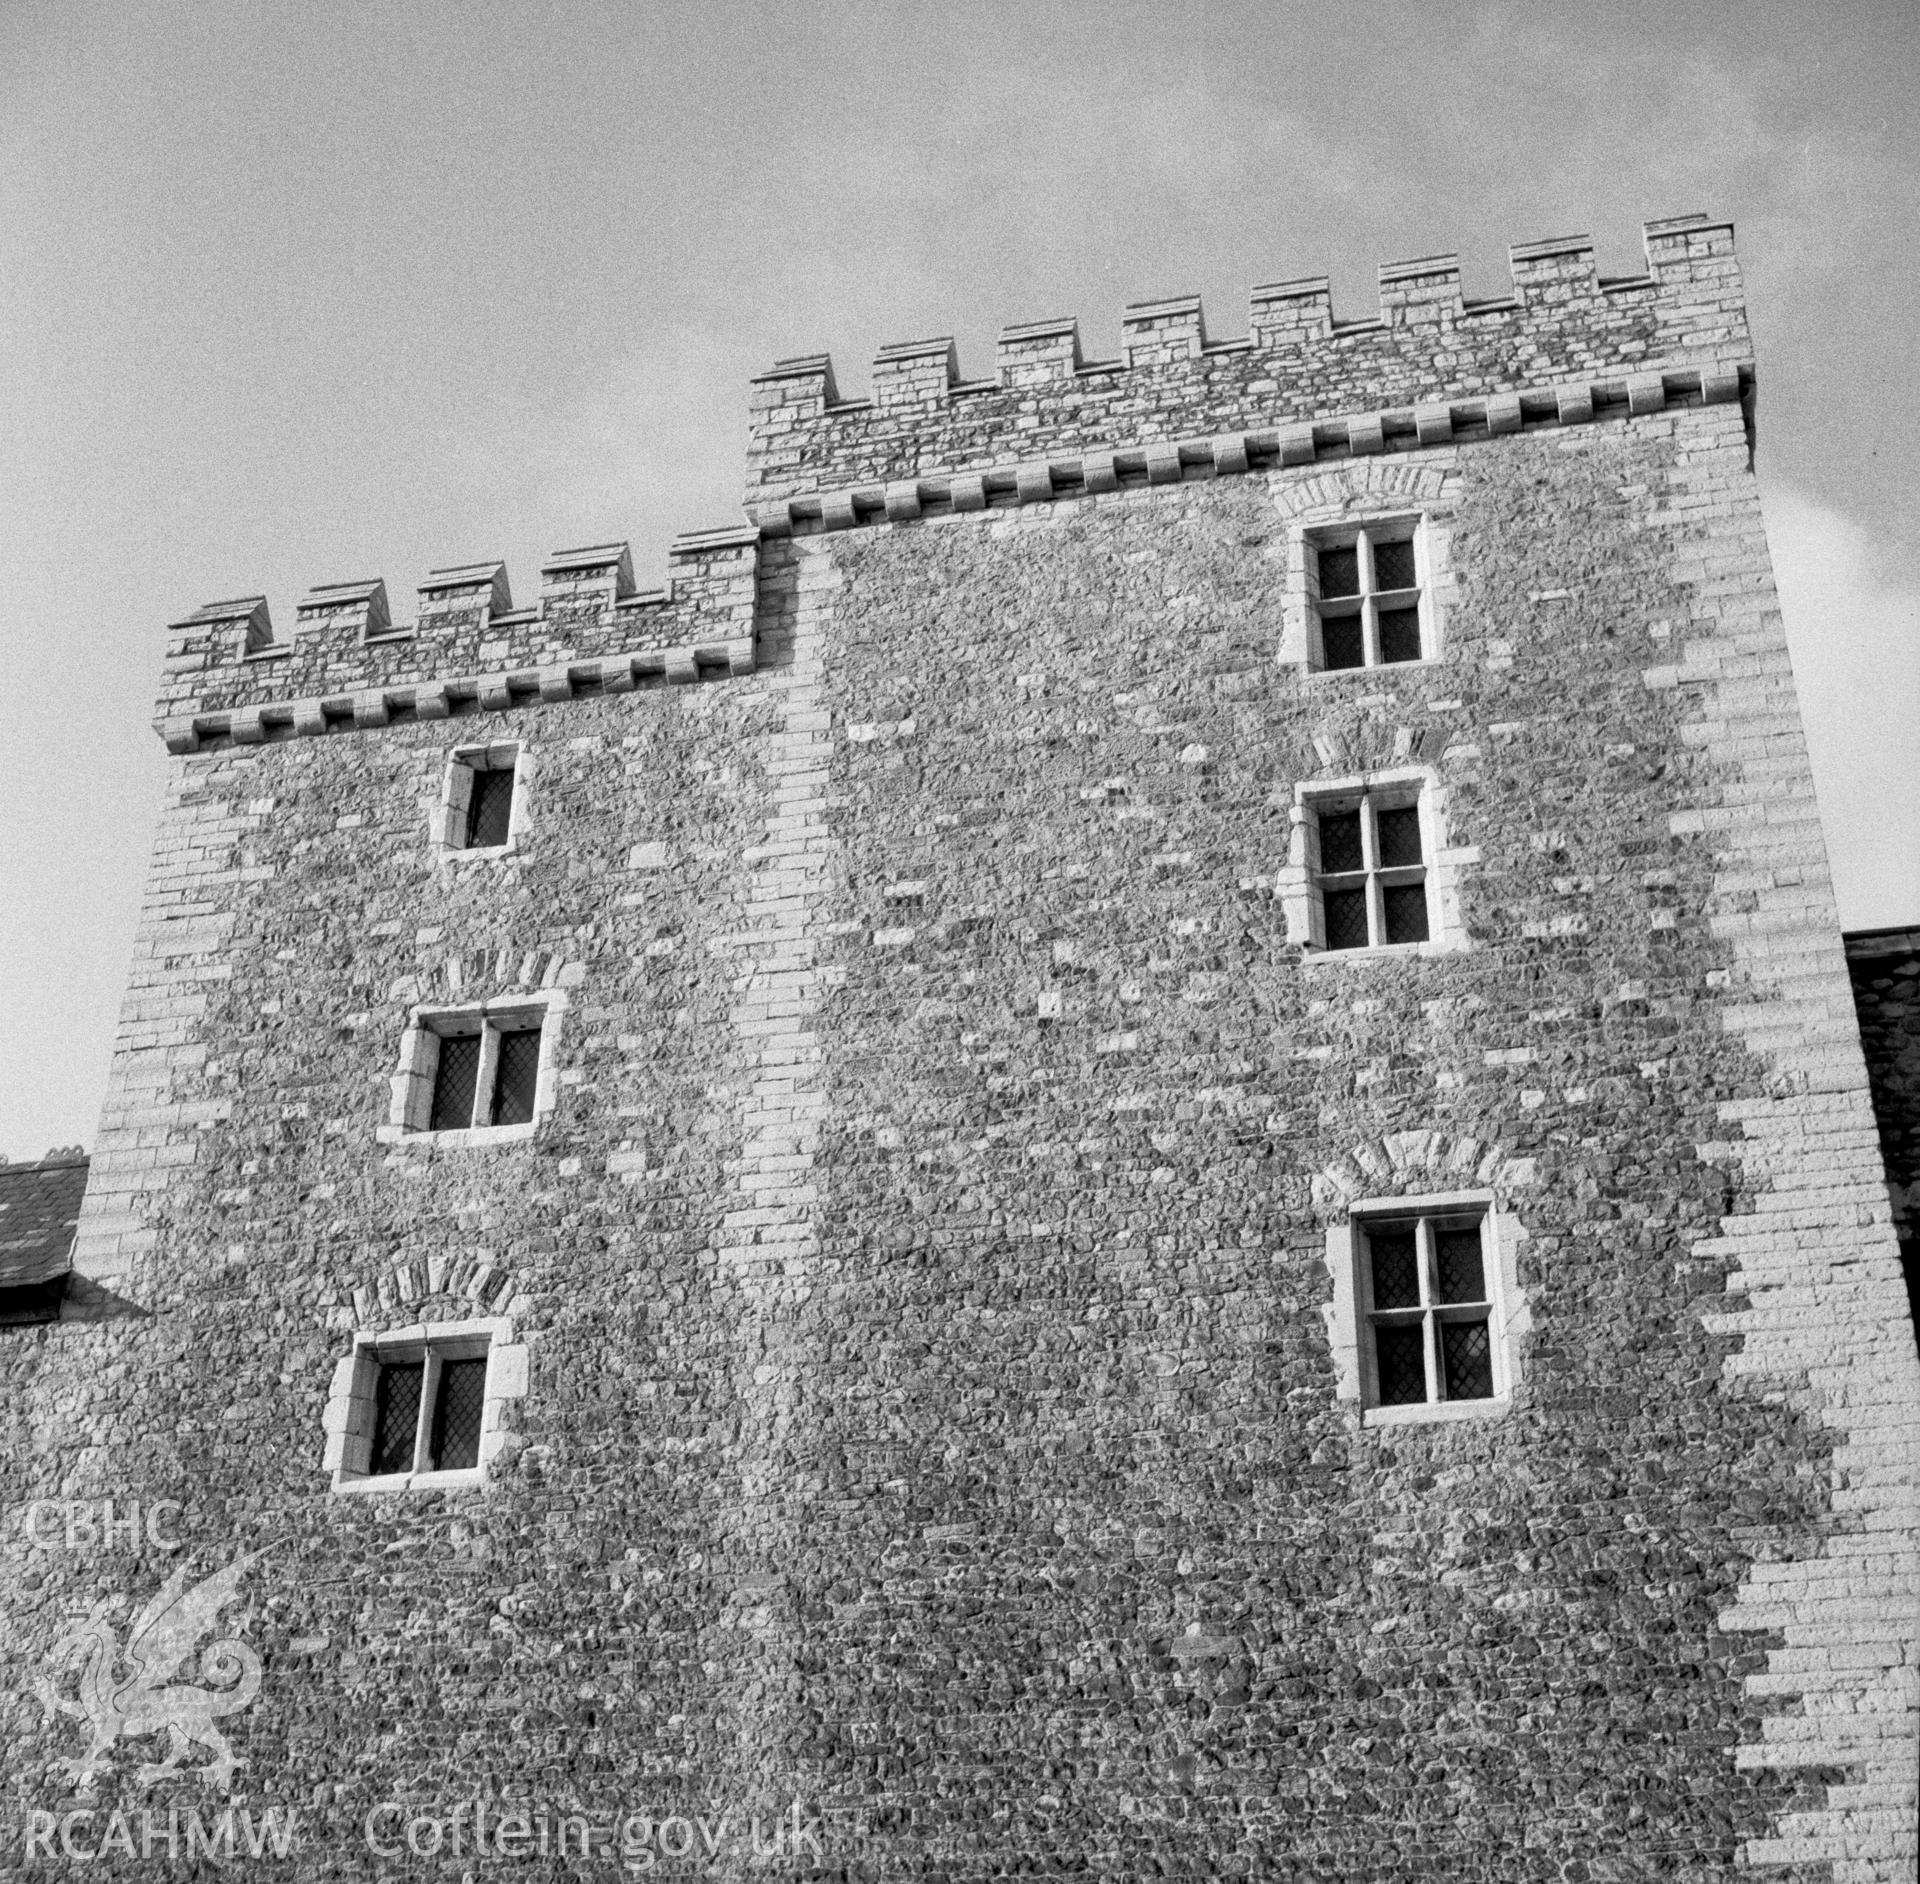 Digital copy of a black and white negative showing south gate at Cardiff Castle, taken 21st February 1966.